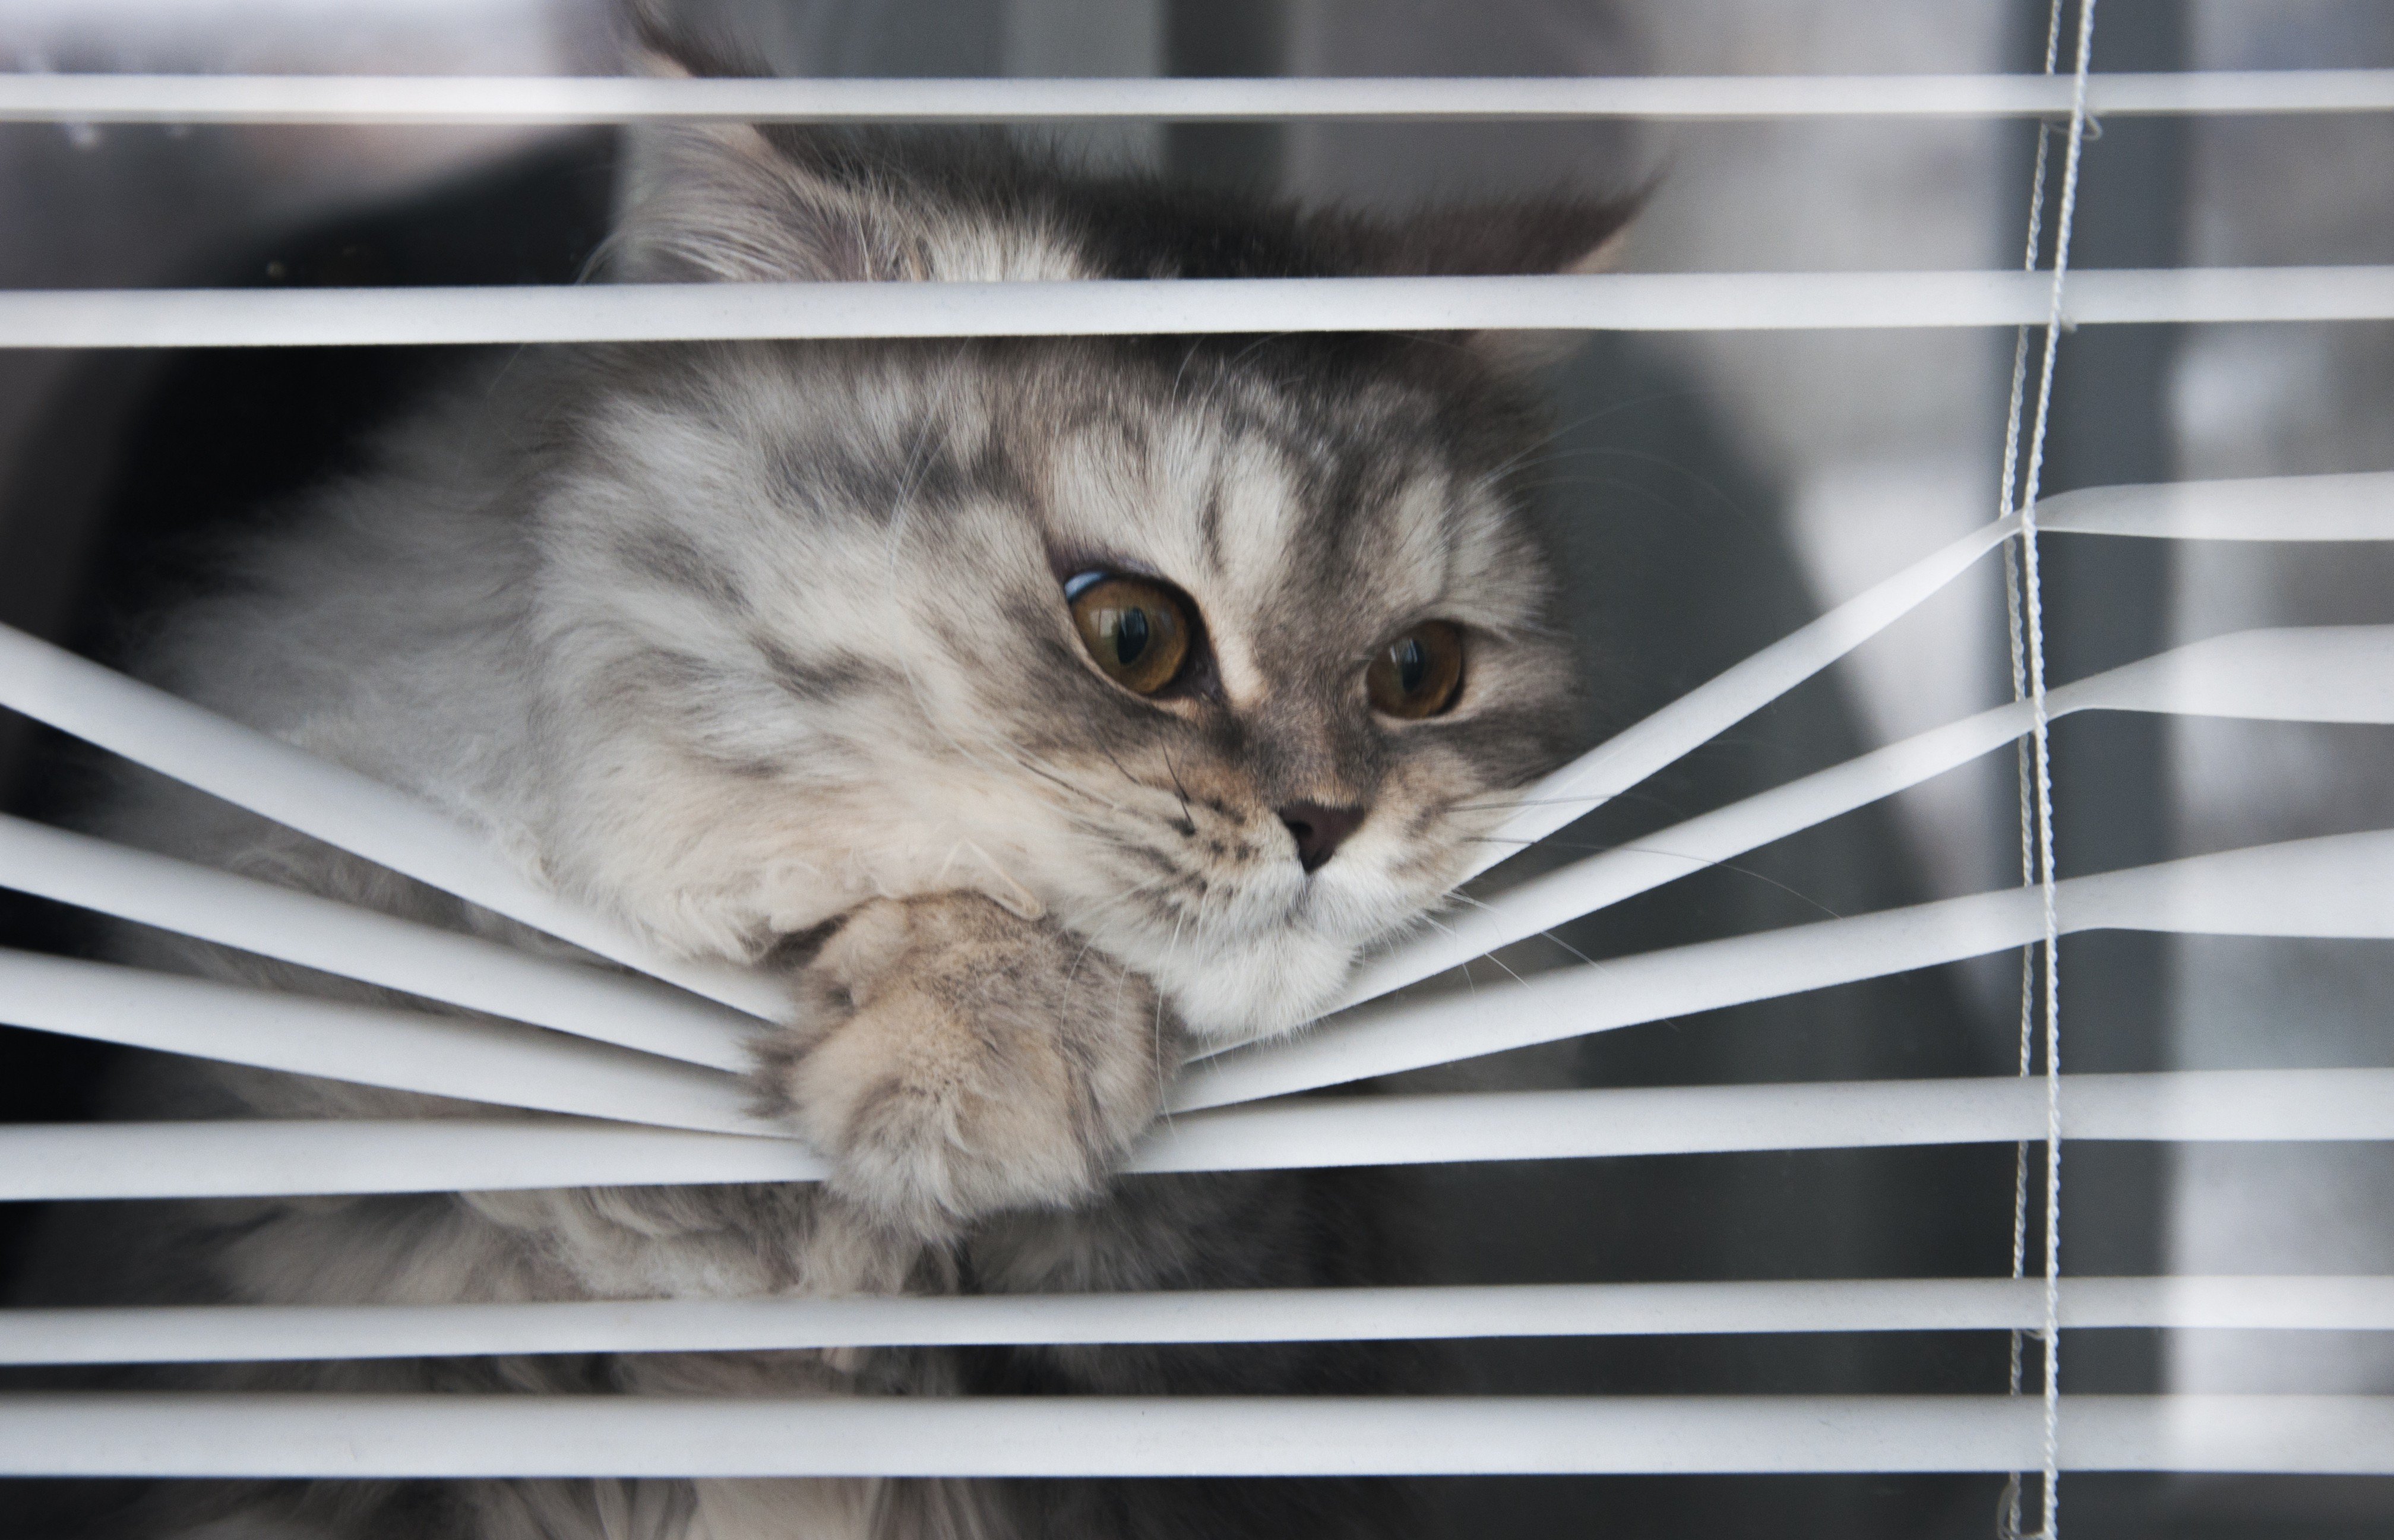 High-rise Hong Kong isn’t much of a cat paradise, and some question whether people should keep them locked up indoors. Here are some tips to make sure your housebound feline is feeling fine and avoid behavioural problems